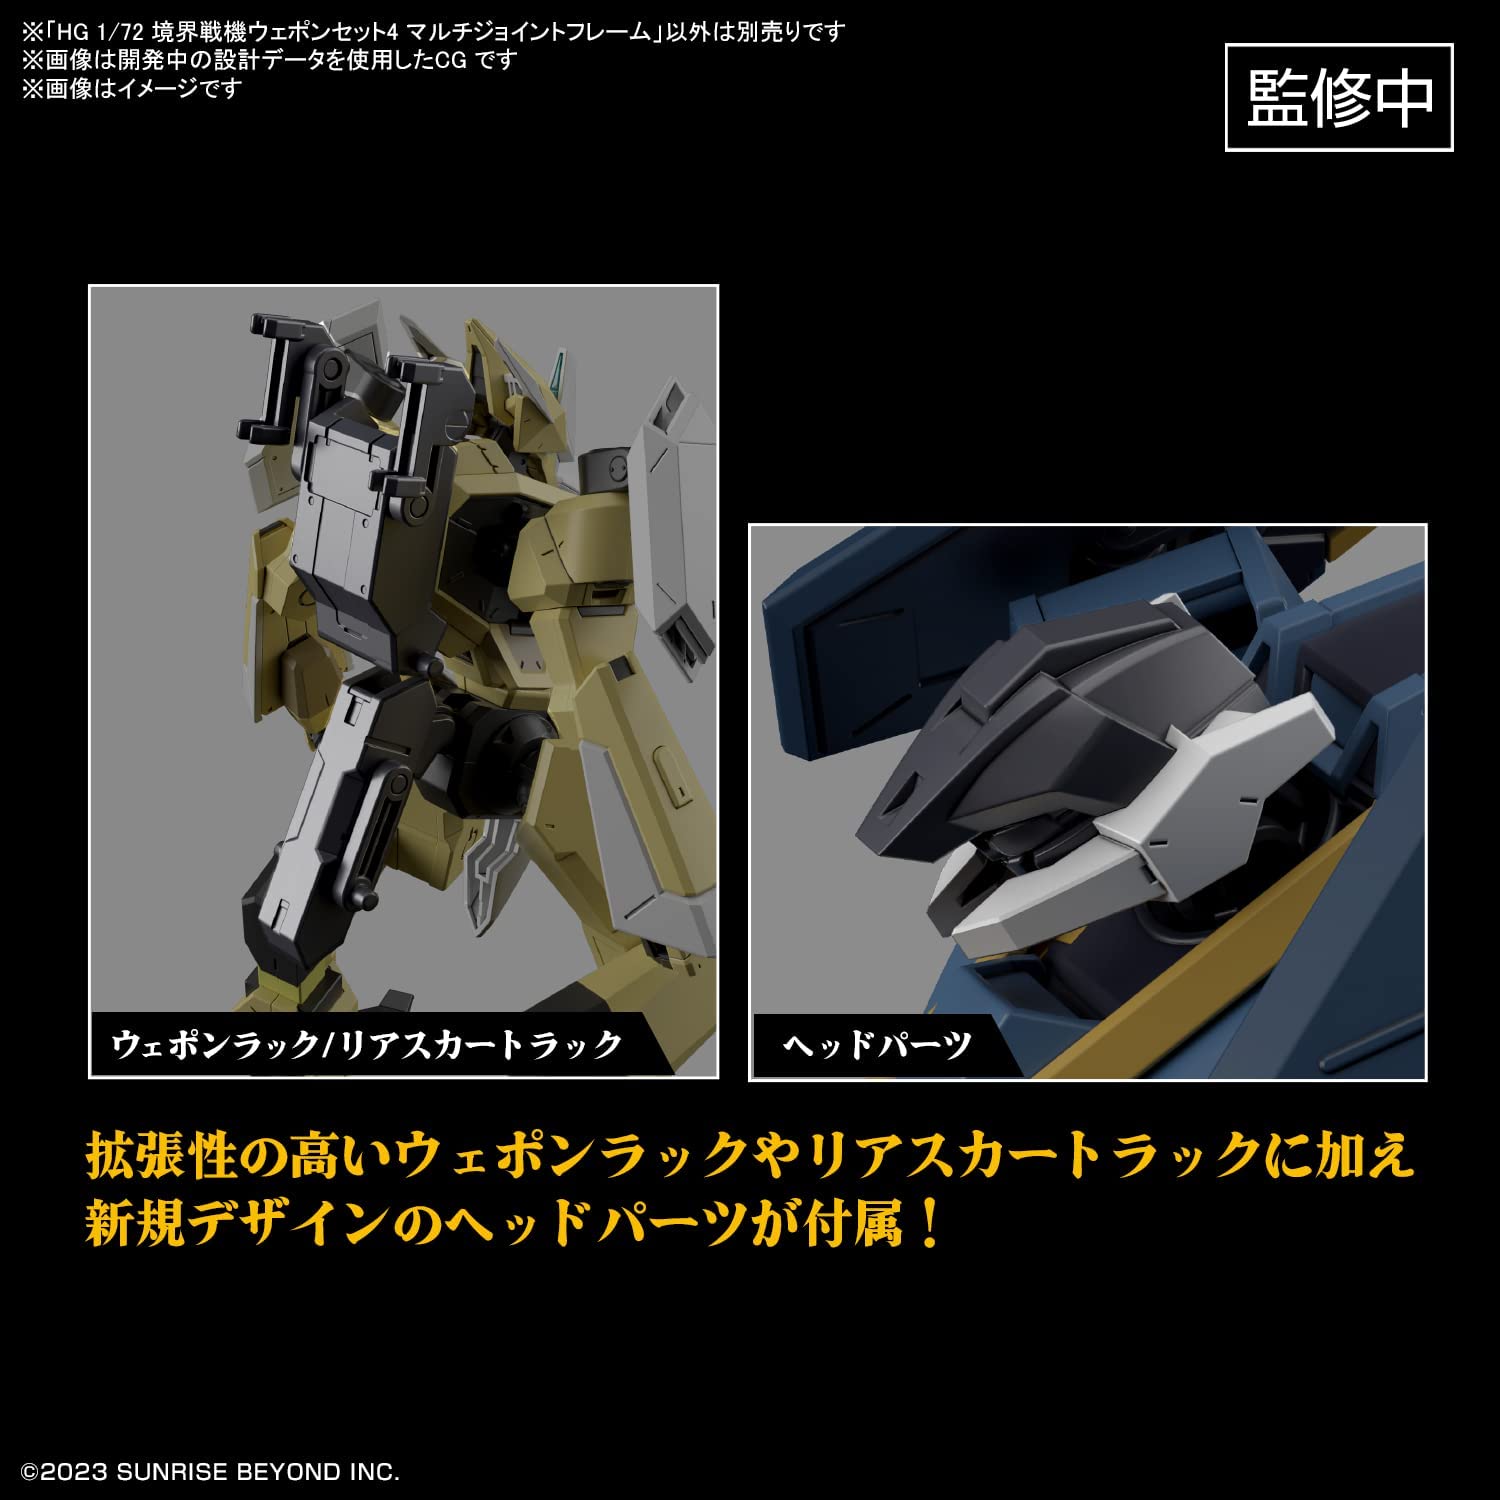 HG Boundary Battlers Weapon Set 4 Multi Joint Frame 1/72 Scale